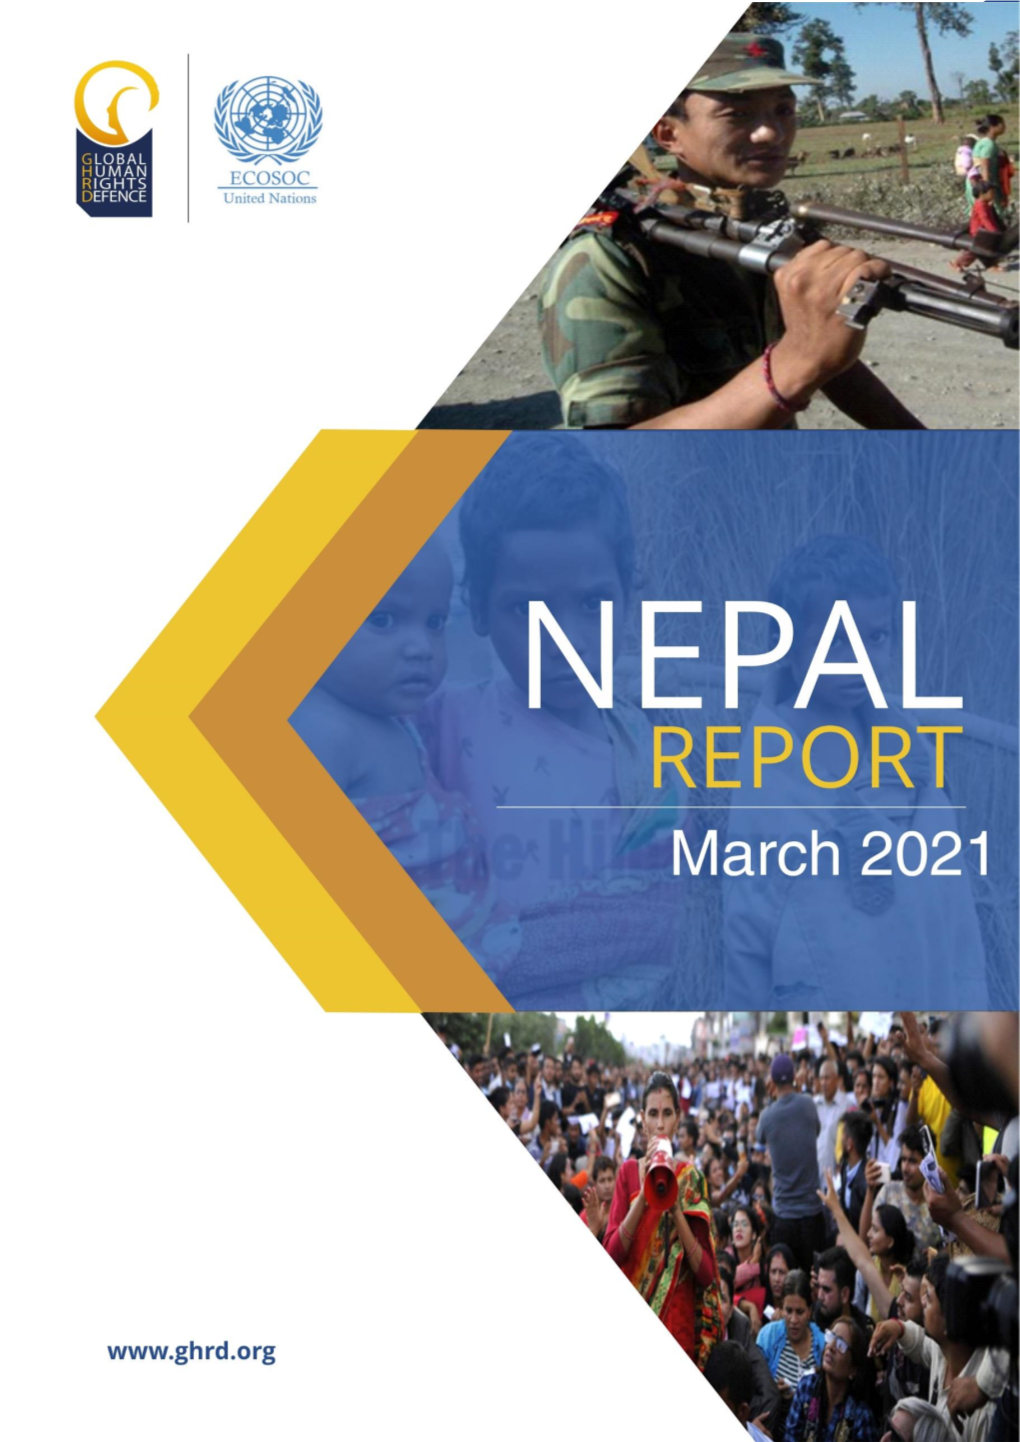 Nepal Human Rights Human Rights Violations Against Minorities in Nepal Human Rights Events of March 2021 Concluding Remarks